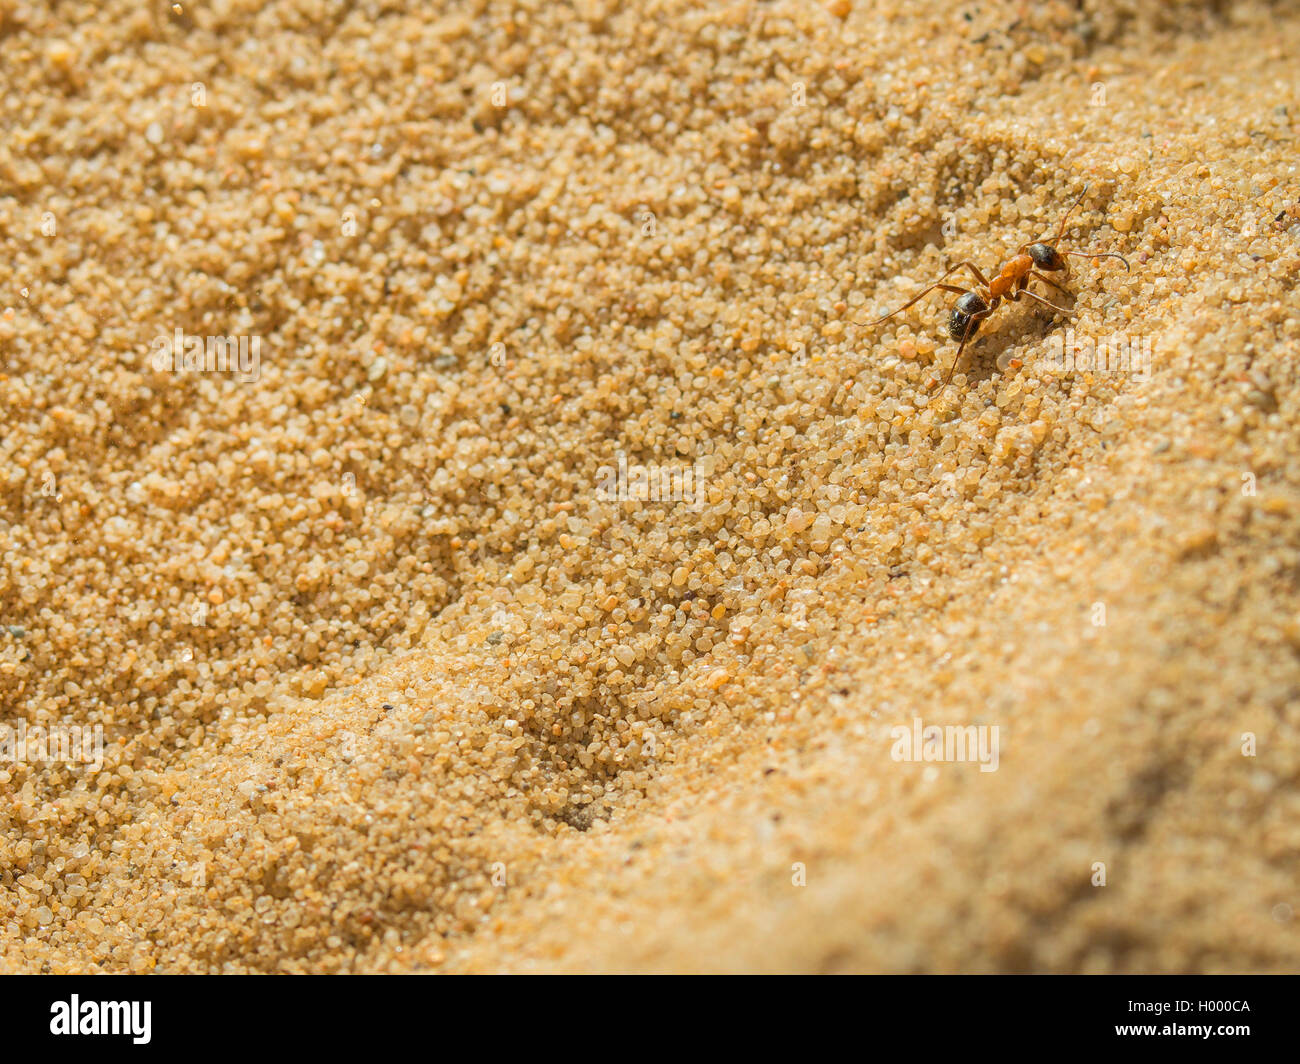 European antlion (Euroleon nostras), Captured ant (Formica rufibarbis) trying to flee out of the conical pit, Germany Stock Photo